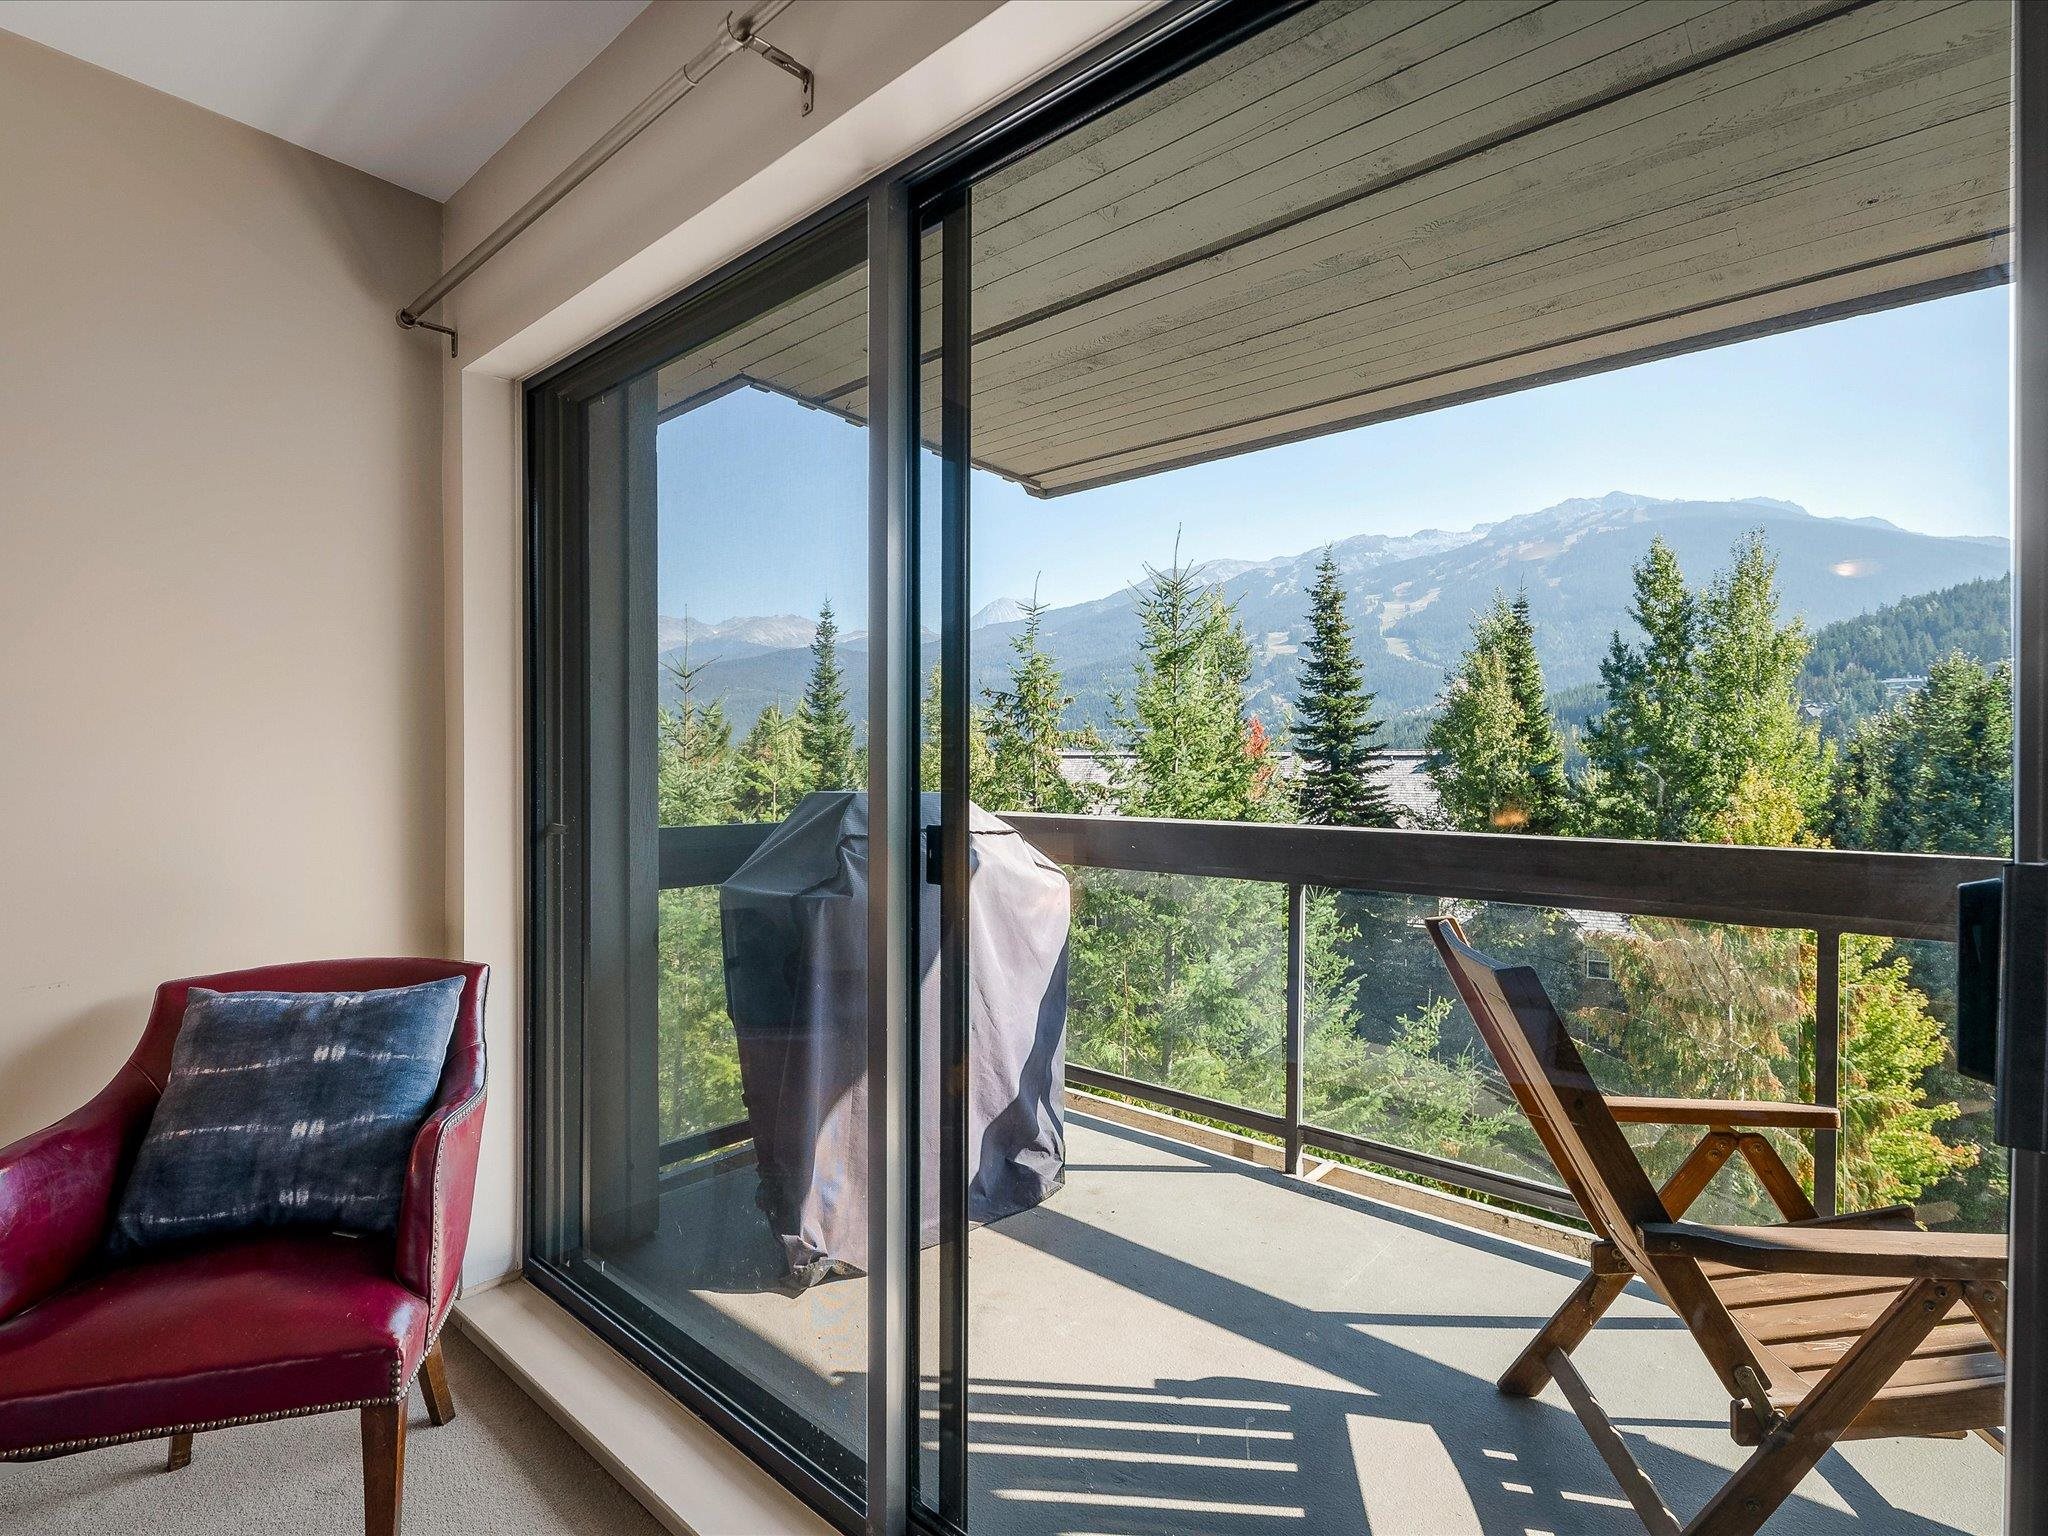 Huge balcony over looking Whistler and Blackcomb Mountains!